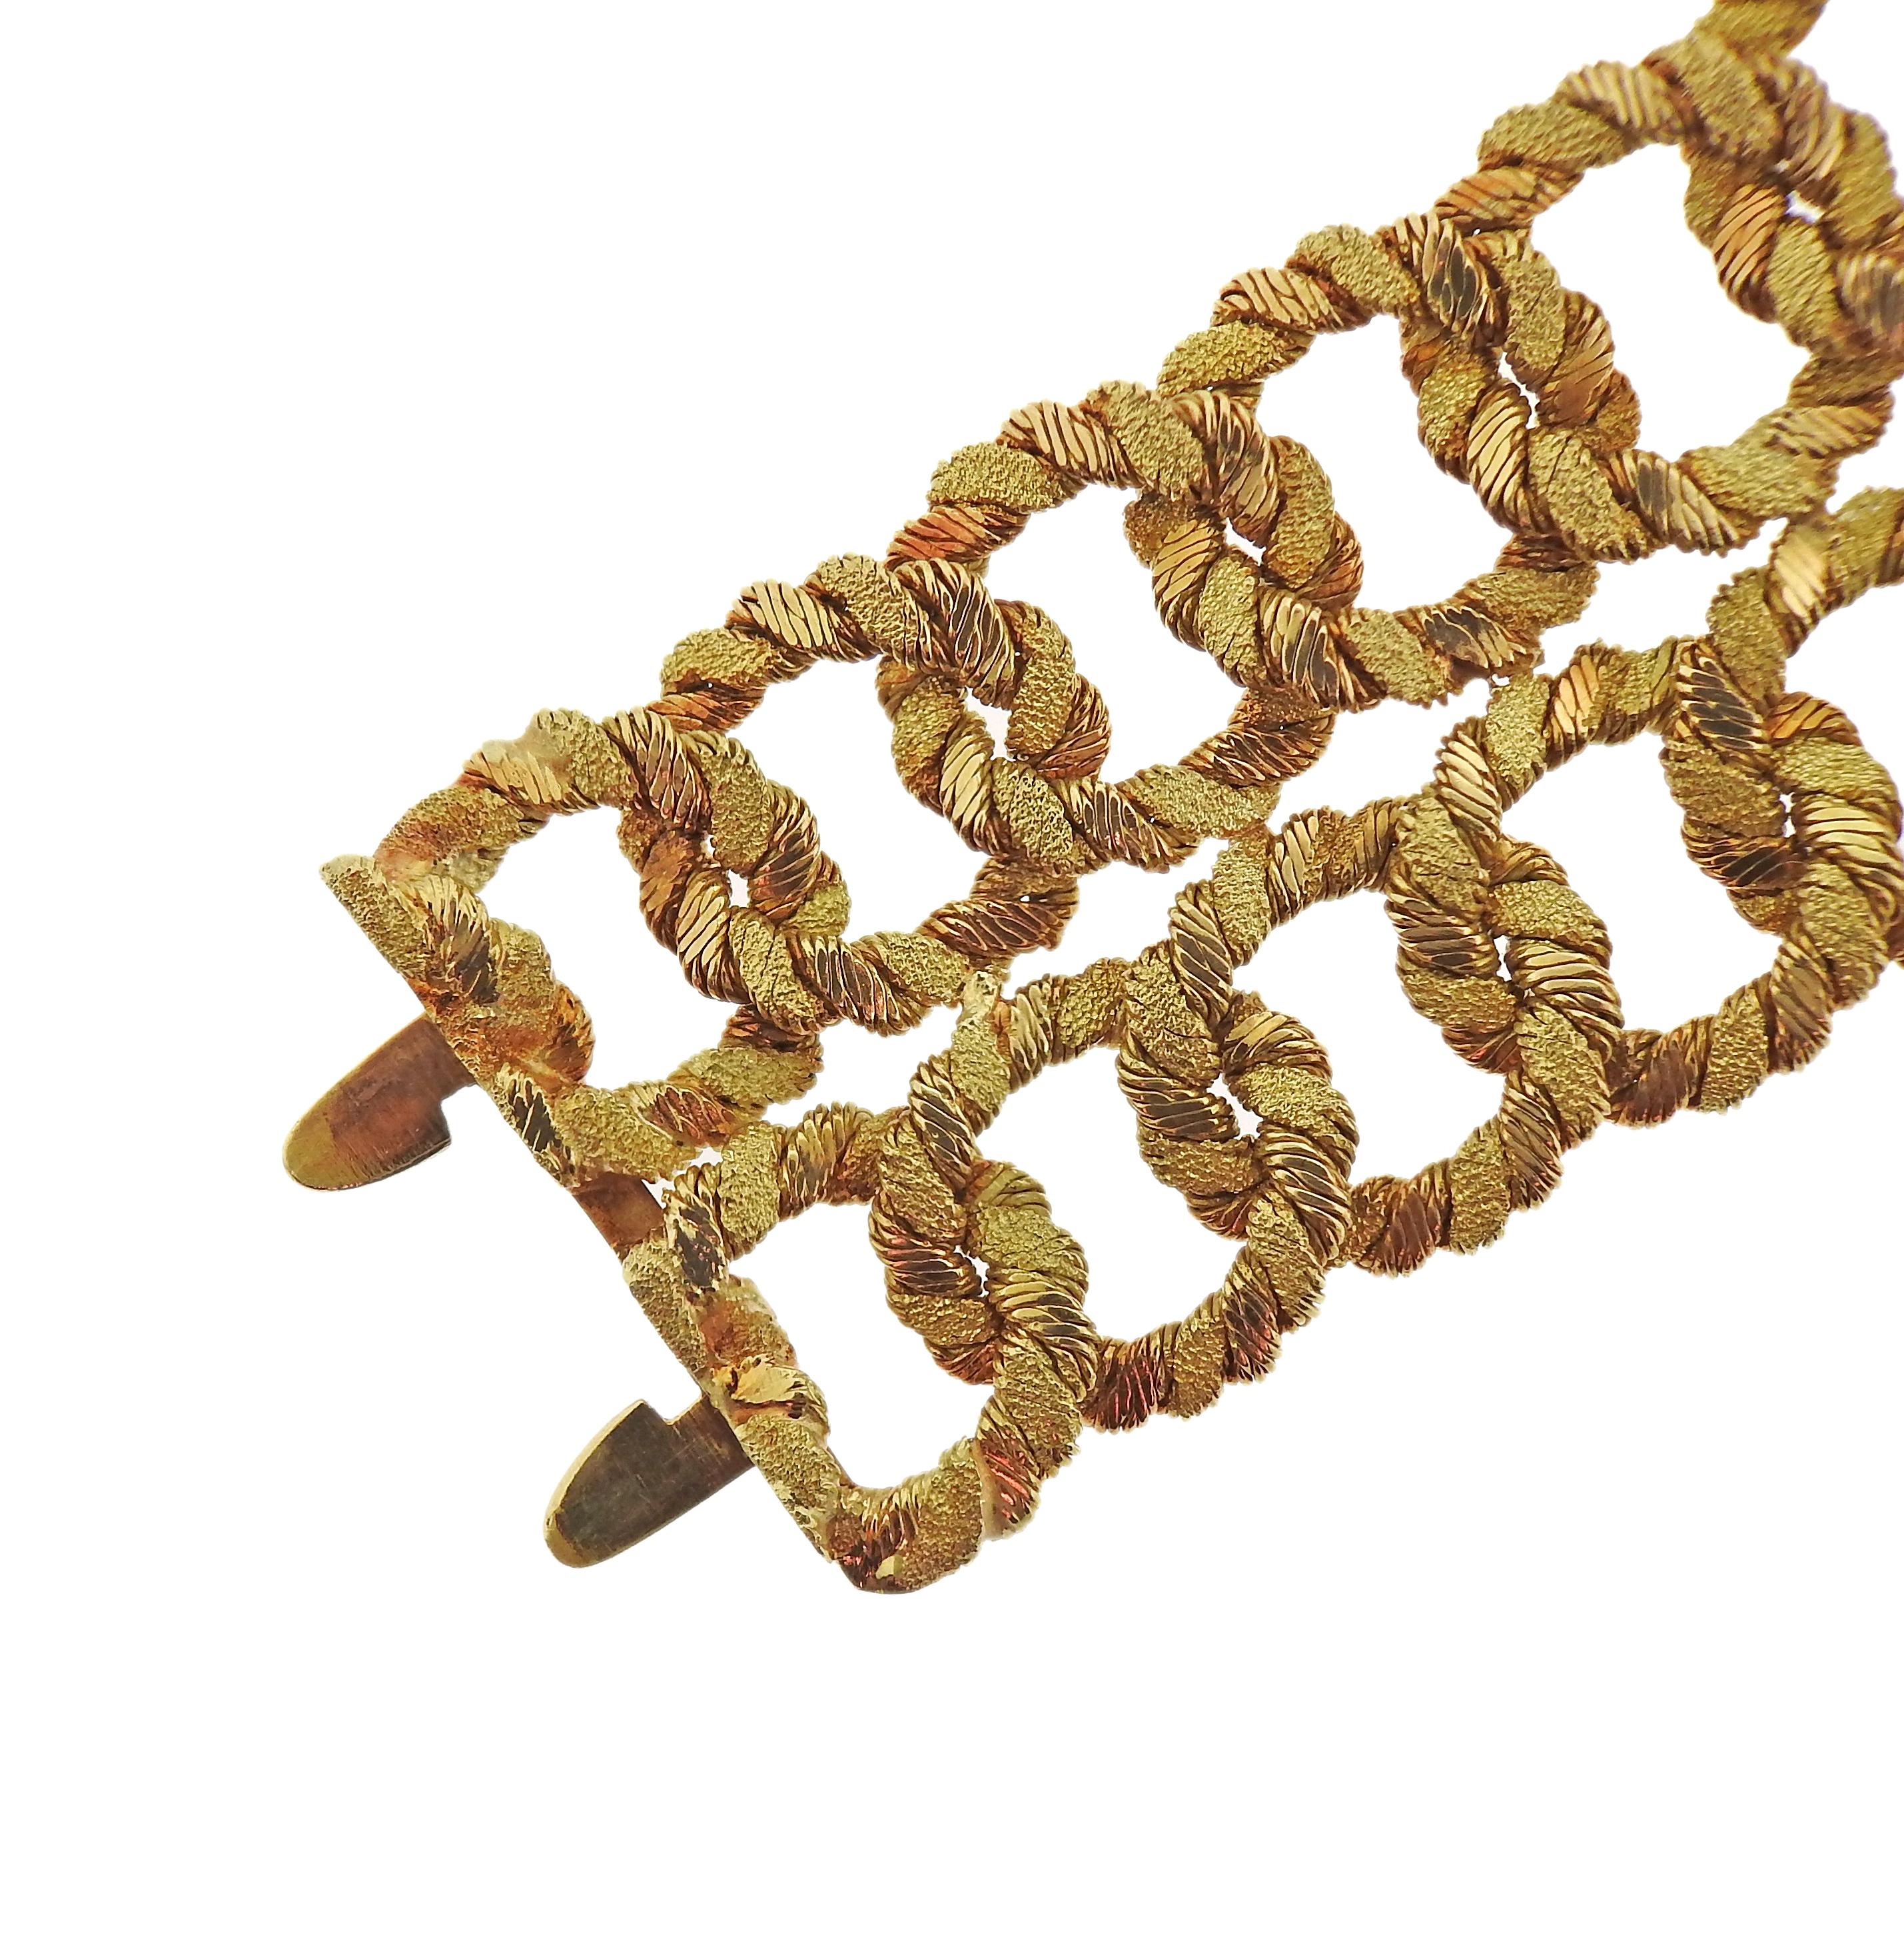 French made, circa 1960s vintage 18k gold bracelet, featuring interlocked links, two rows. Bracelet is 7.25